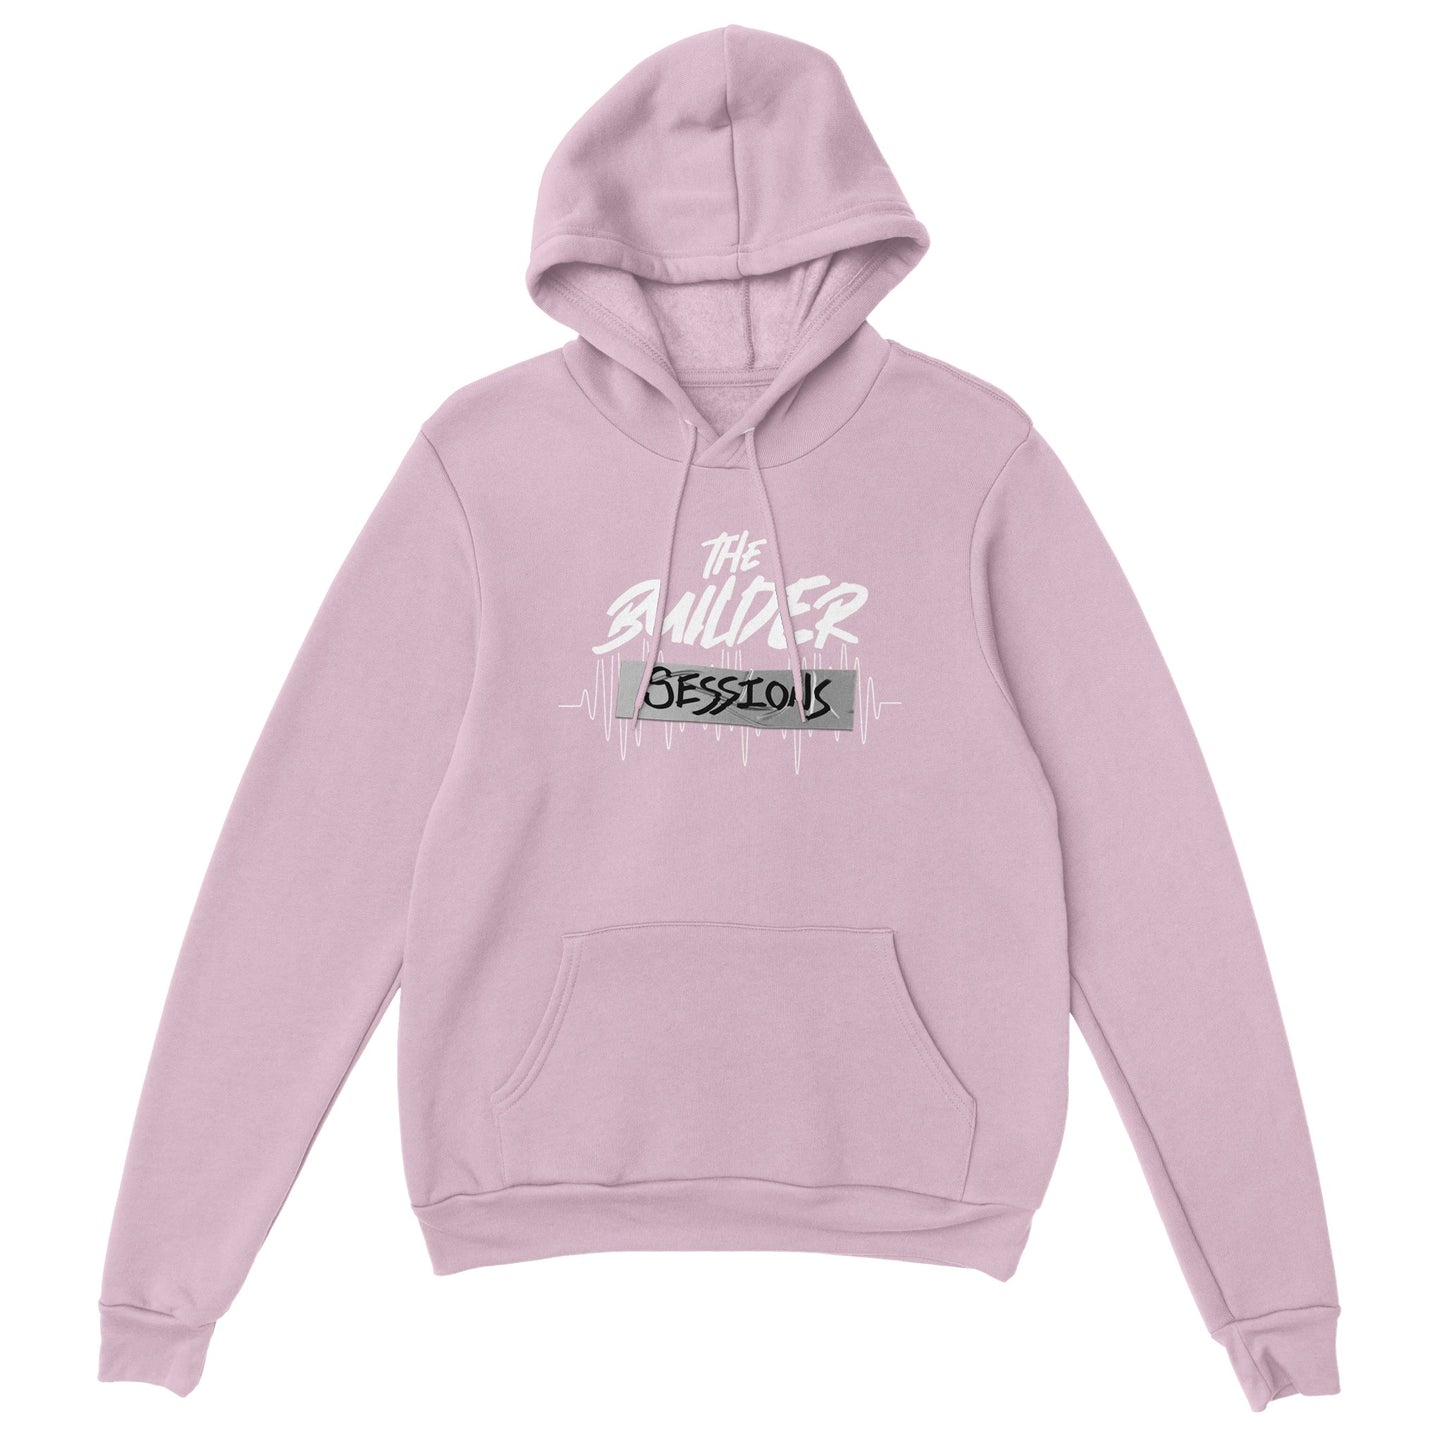 The Builder Sessions Duct Tape Pullover Hoodie